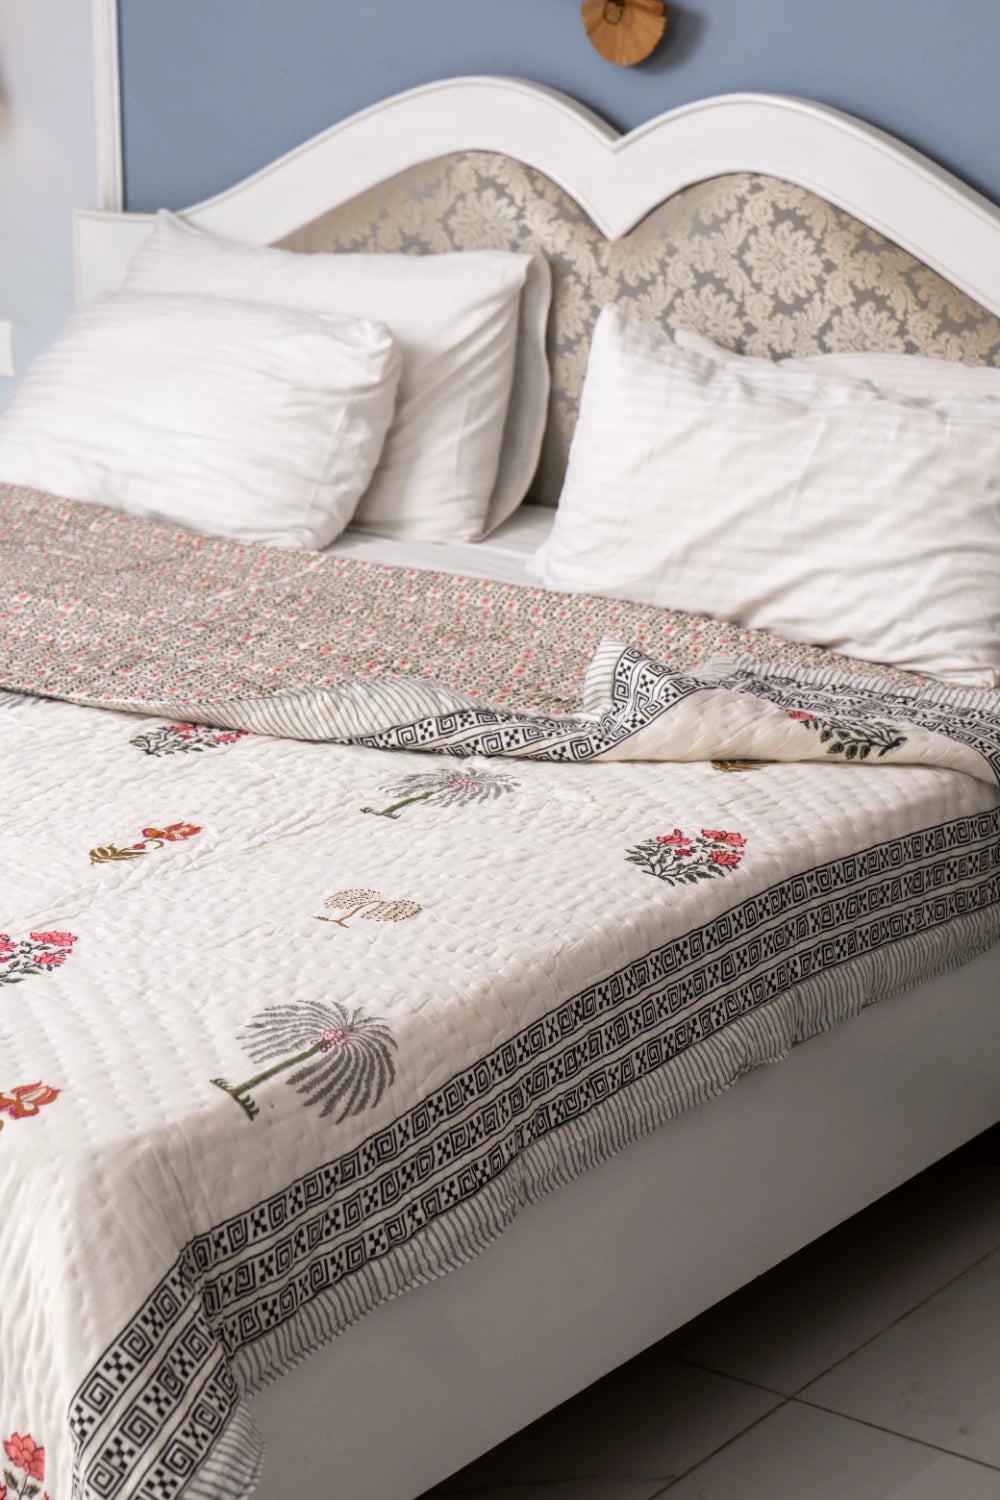 Comfort: All Season Mulmul Cotton Quilts for AC Bliss